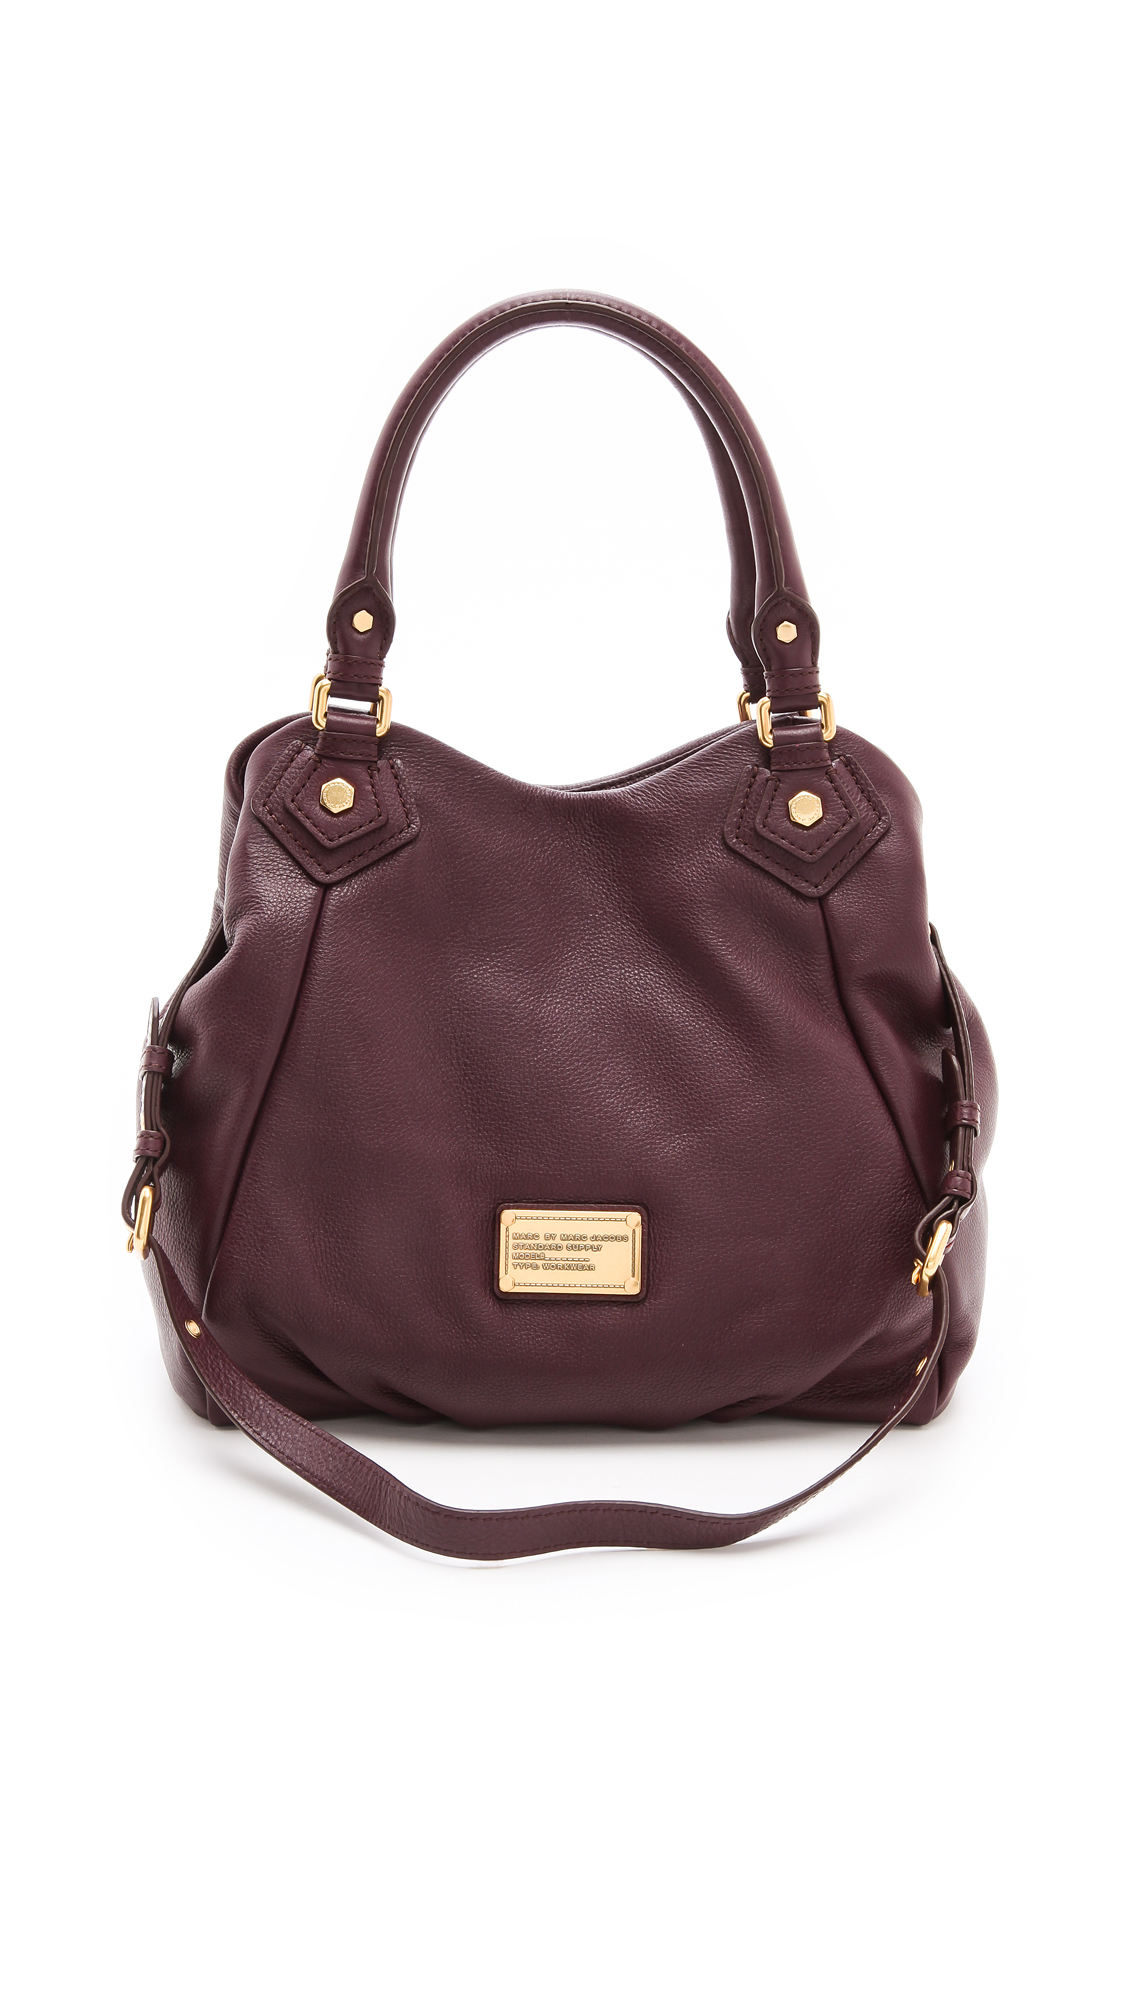 Lyst - Marc By Marc Jacobs Classic Q Fran Bag in Brown